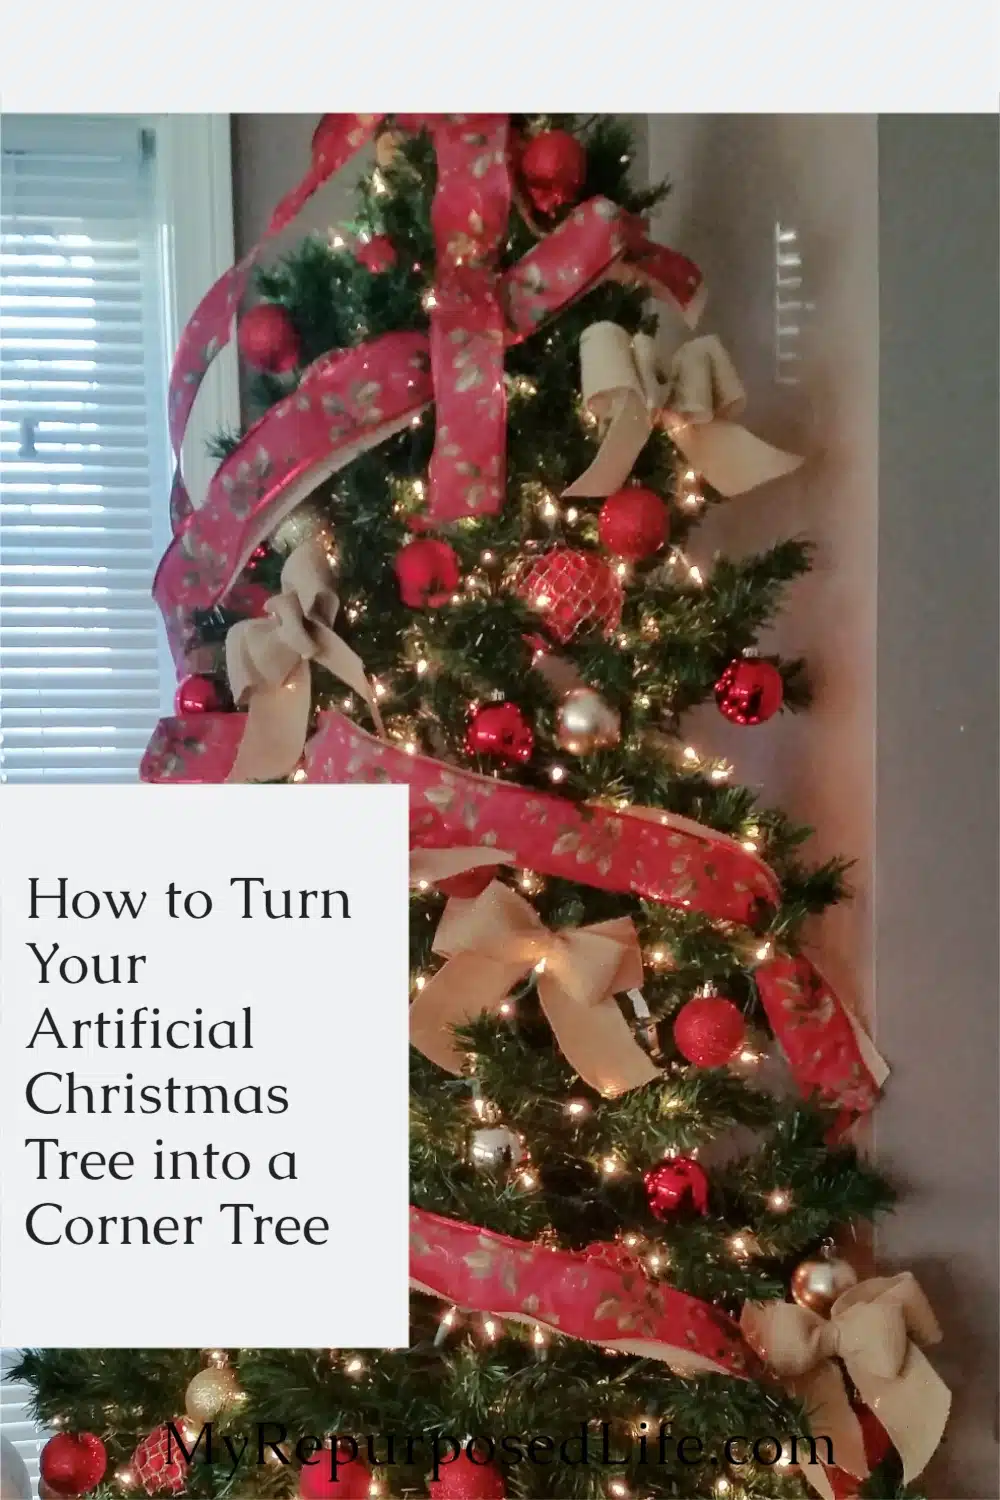 How to configure your existing artificial Christmas tree into a corner Christmas tree that will take up much less room in your small space. #MyRepurposedLife #upcycle via @repurposedlife